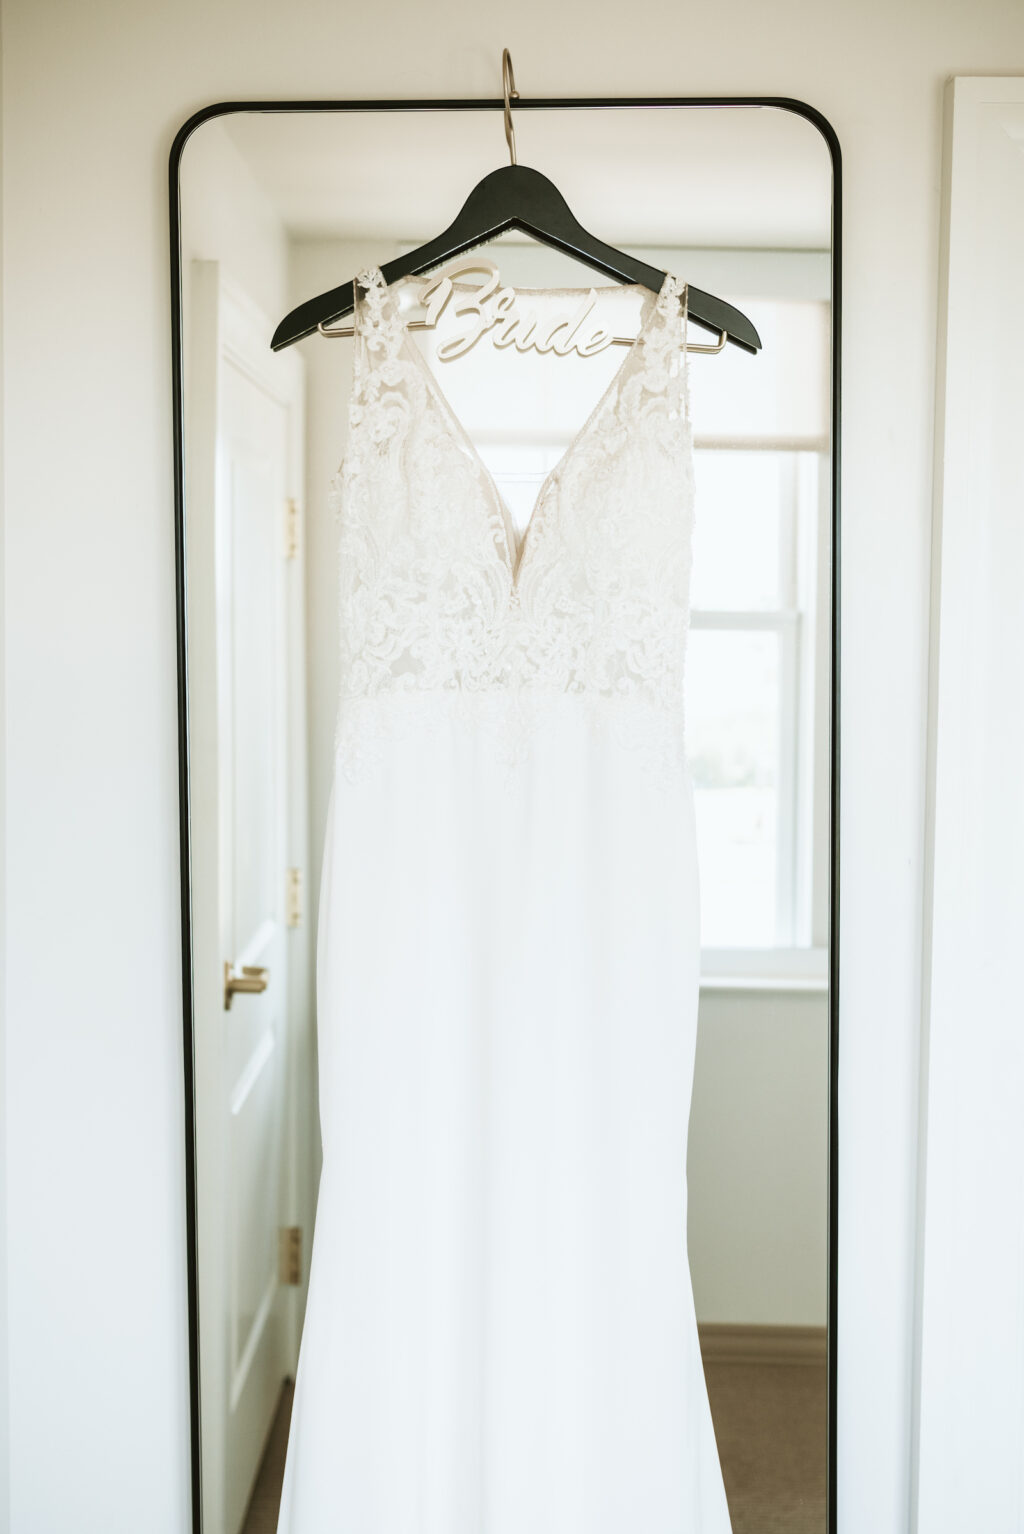 Classic fitted wedding dress with lace and illusion bodice hanging on mirror